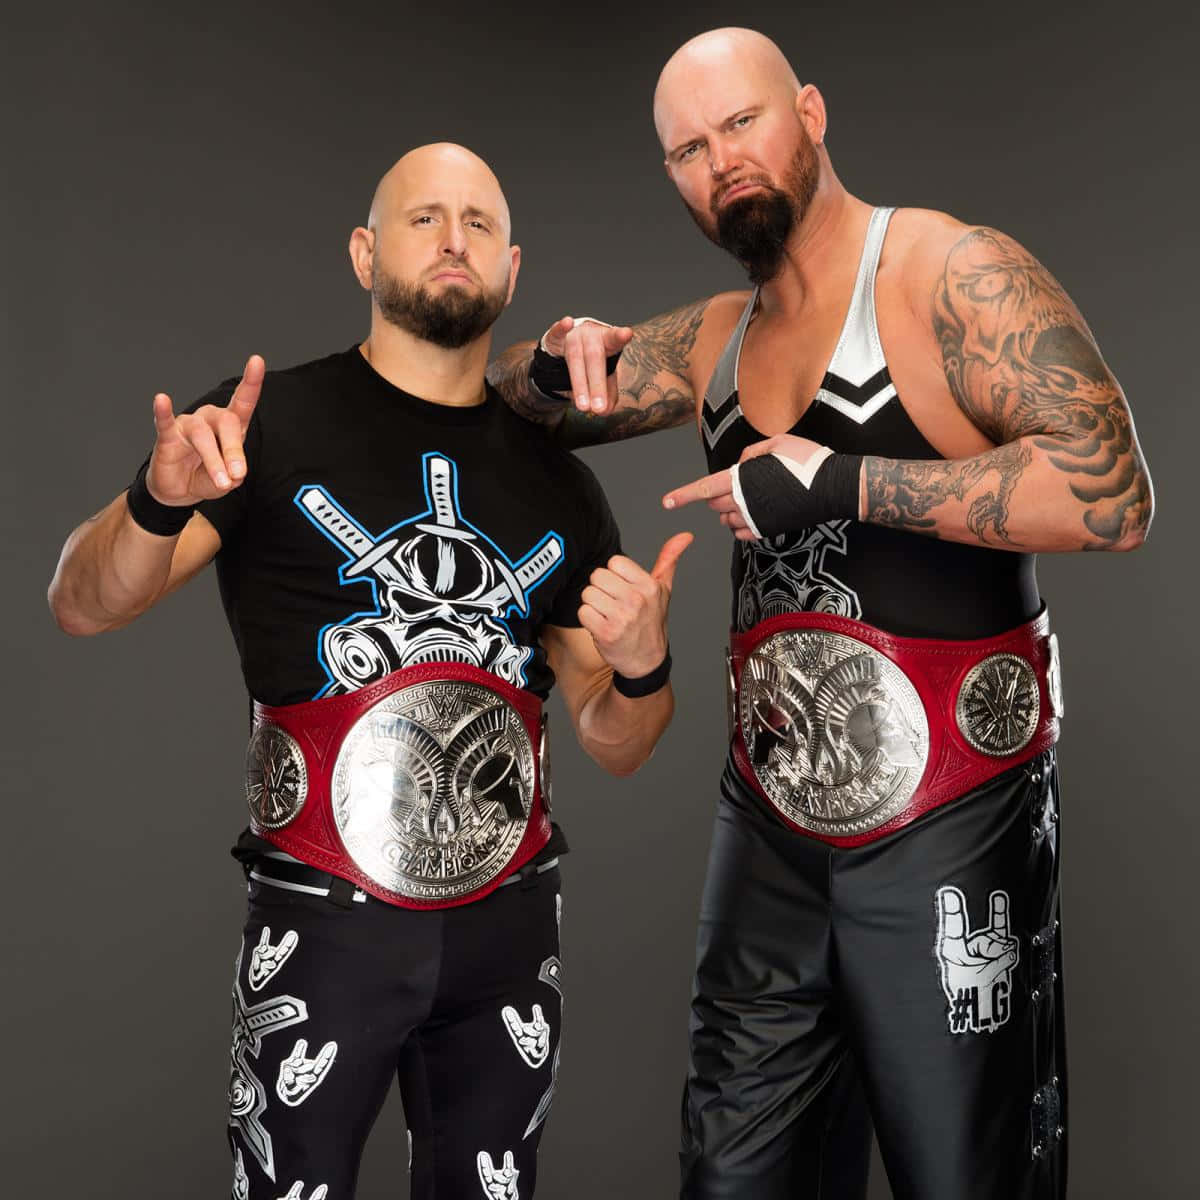 Karl Anderson and Doc Gallows pose in a professional photoshoot Wallpaper